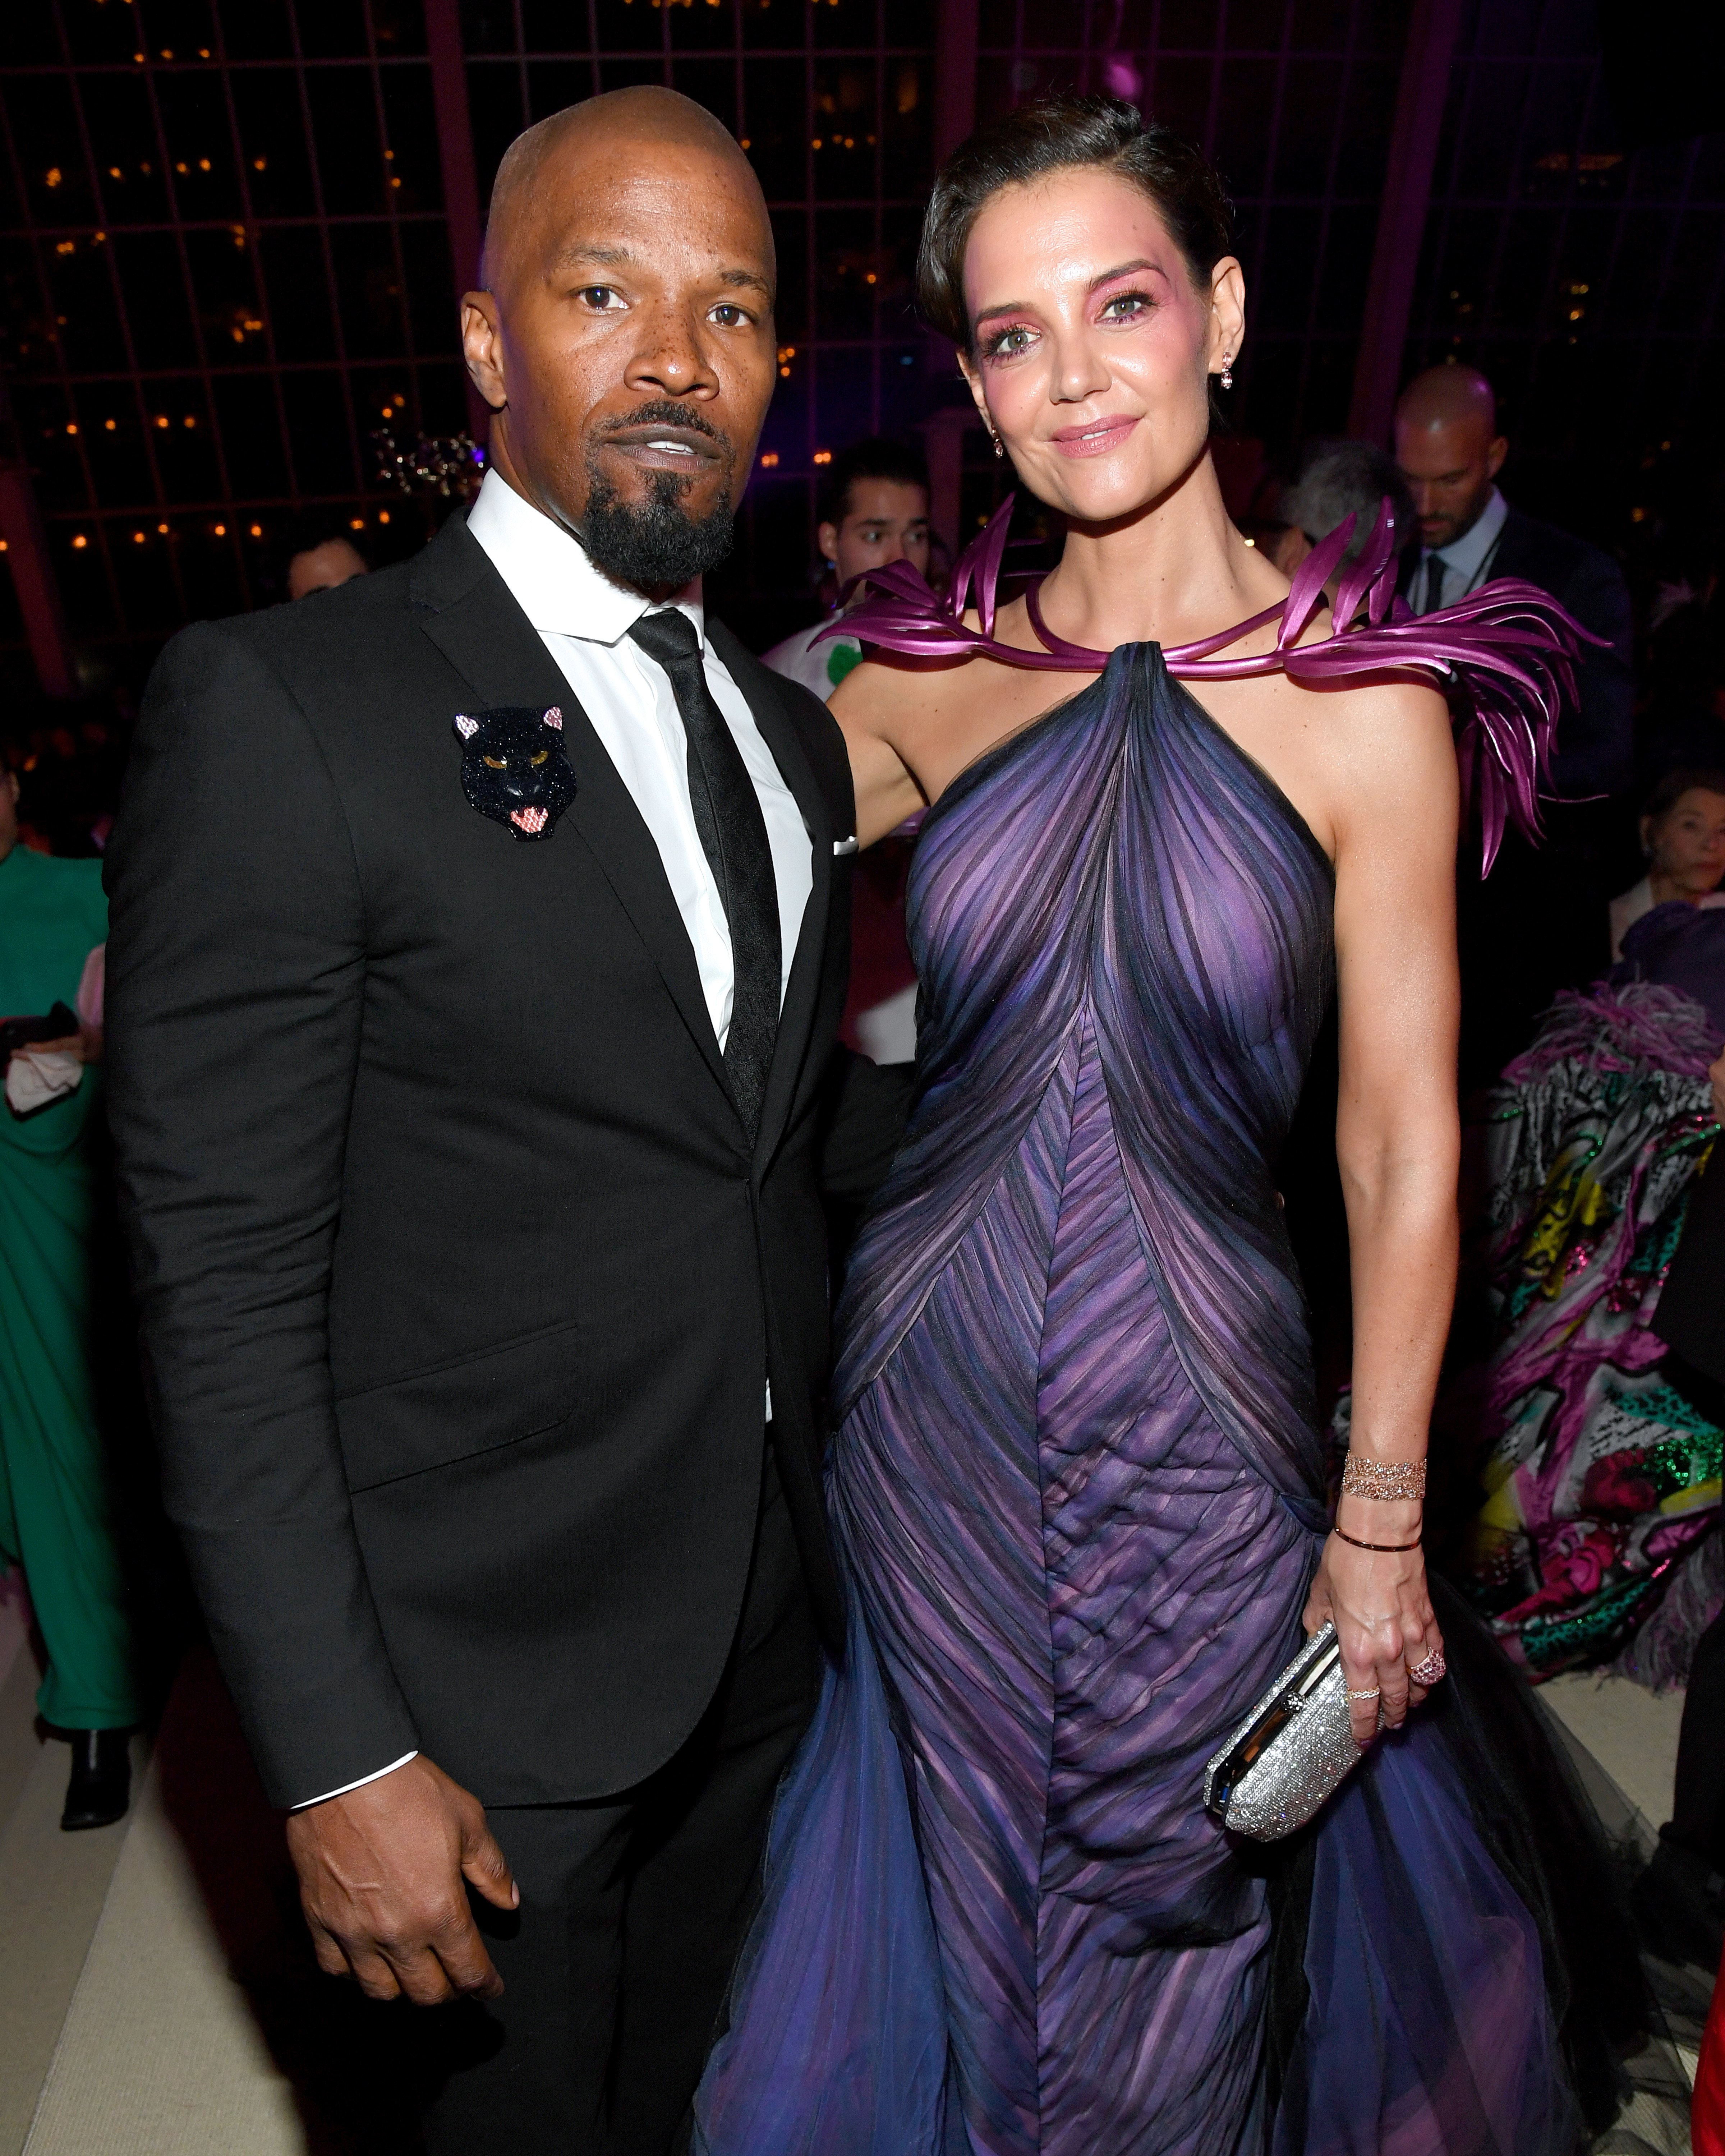 Jamie Foxx and Katie Holmes attending The 2019 Met Gala Celebrating Camp: Notes on Fashion at Metropolitan Museum of Art on May 6, 2019 in New York City. | Source: Getty Images